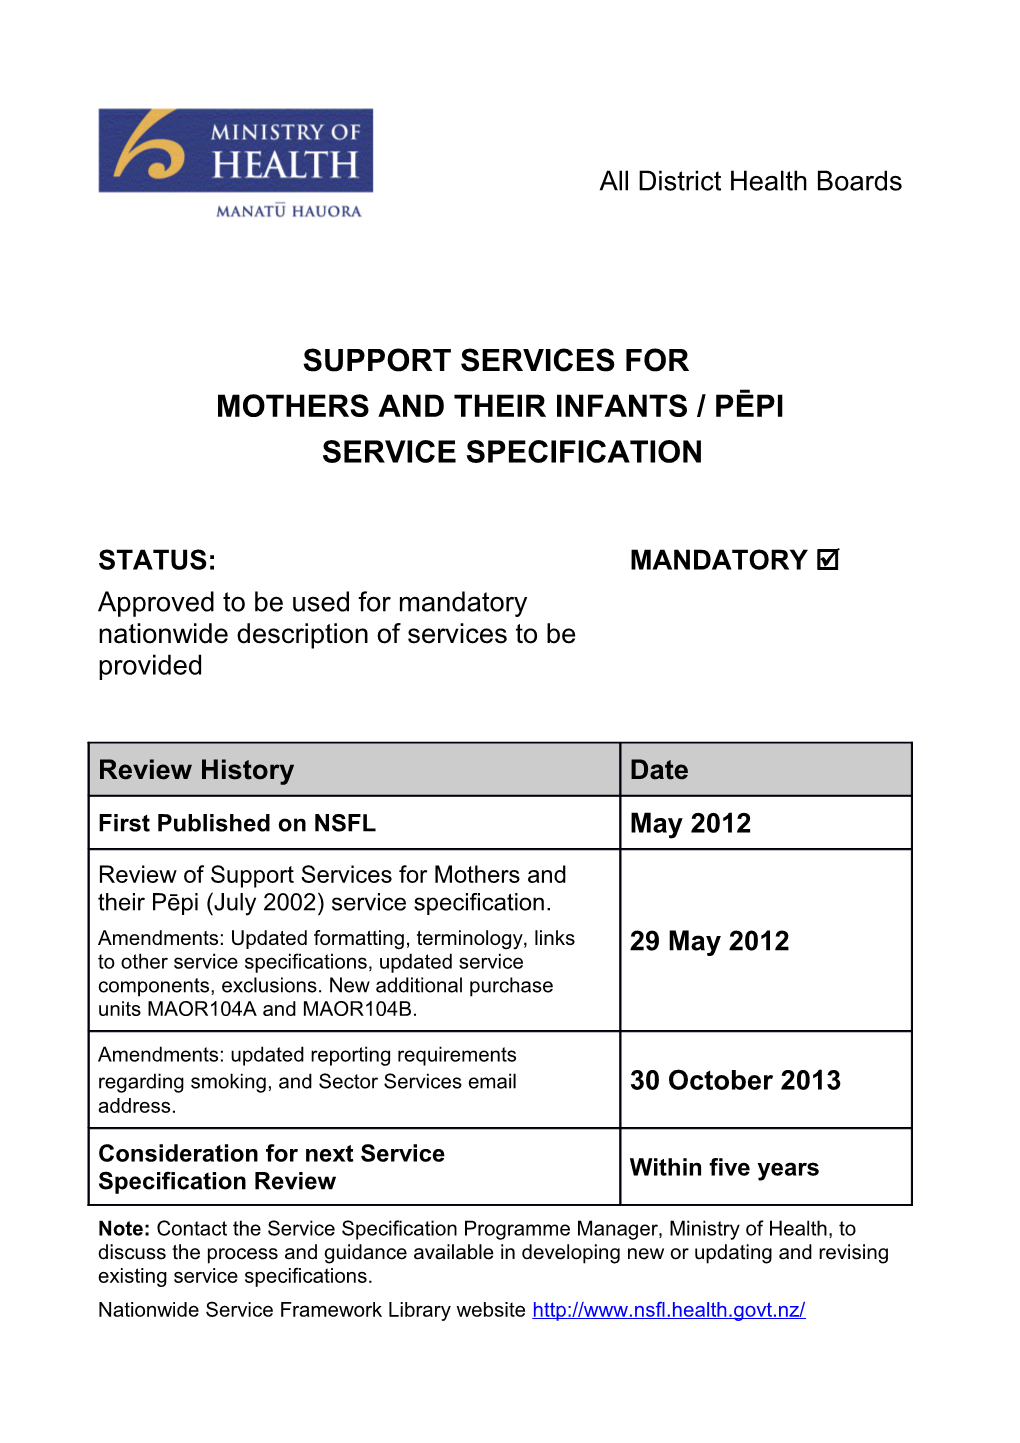 Support Services for Mothers and Their Pepi